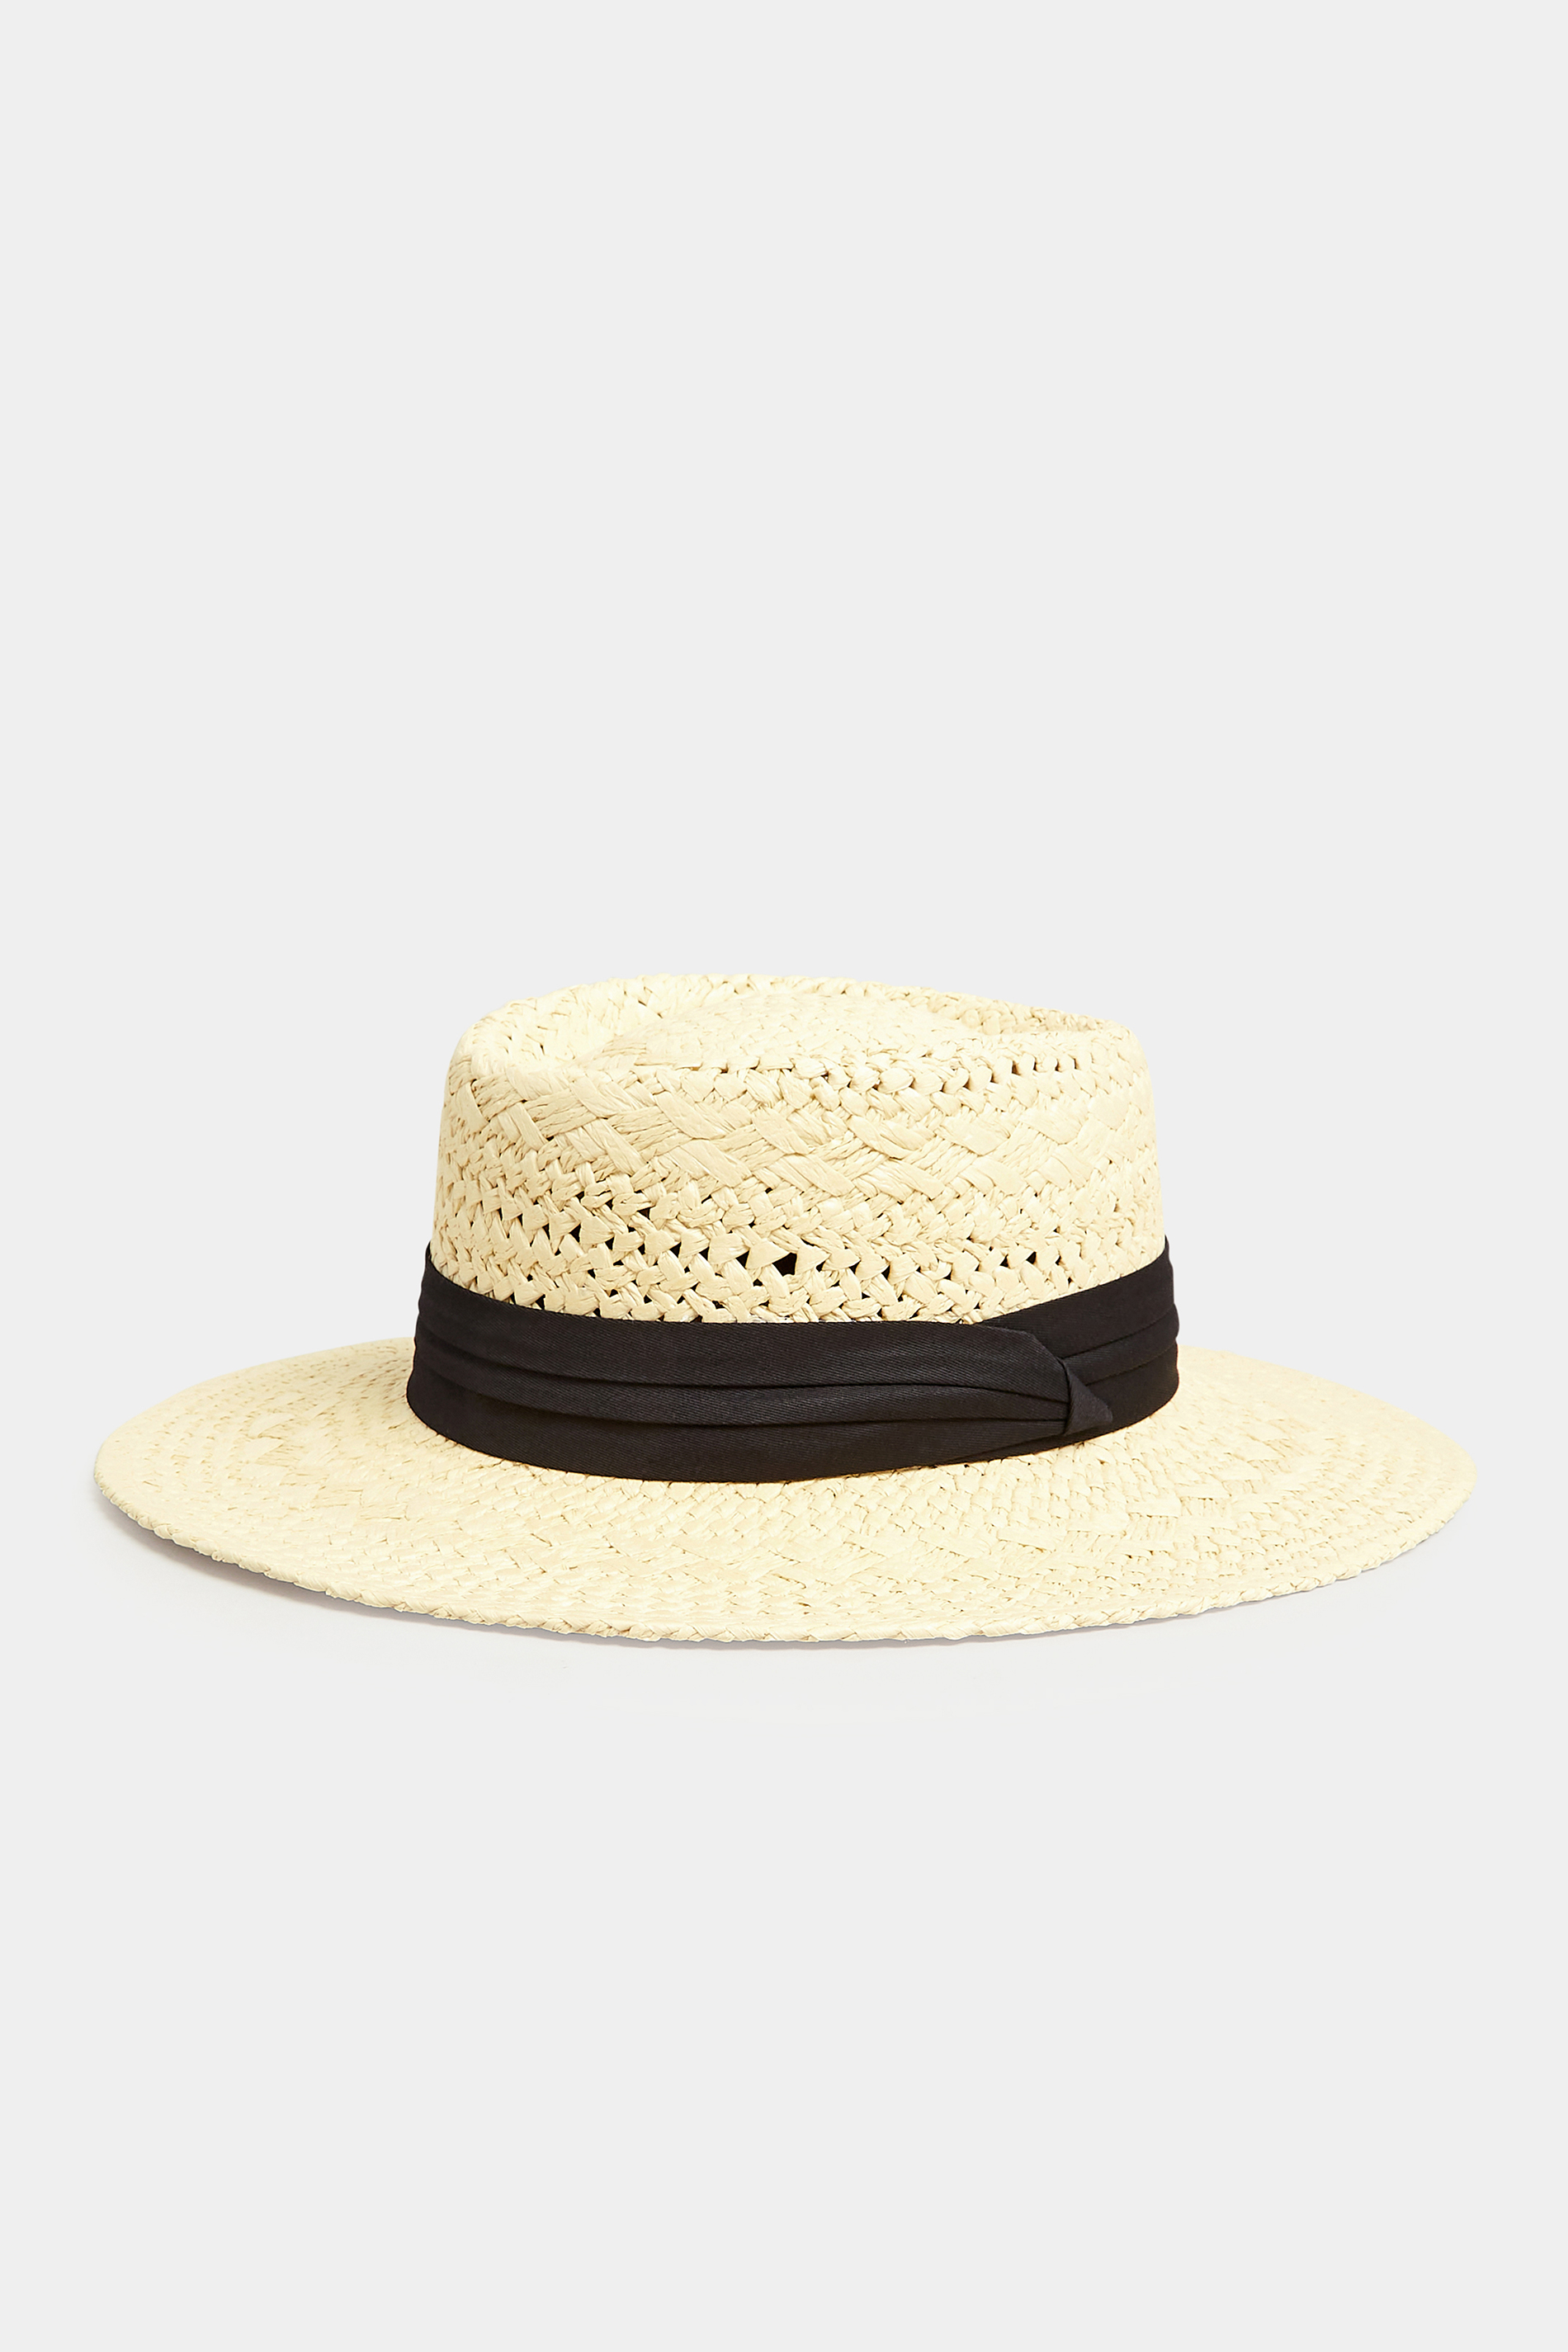 Cream Straw Boater Hat | Yours Clothing 2